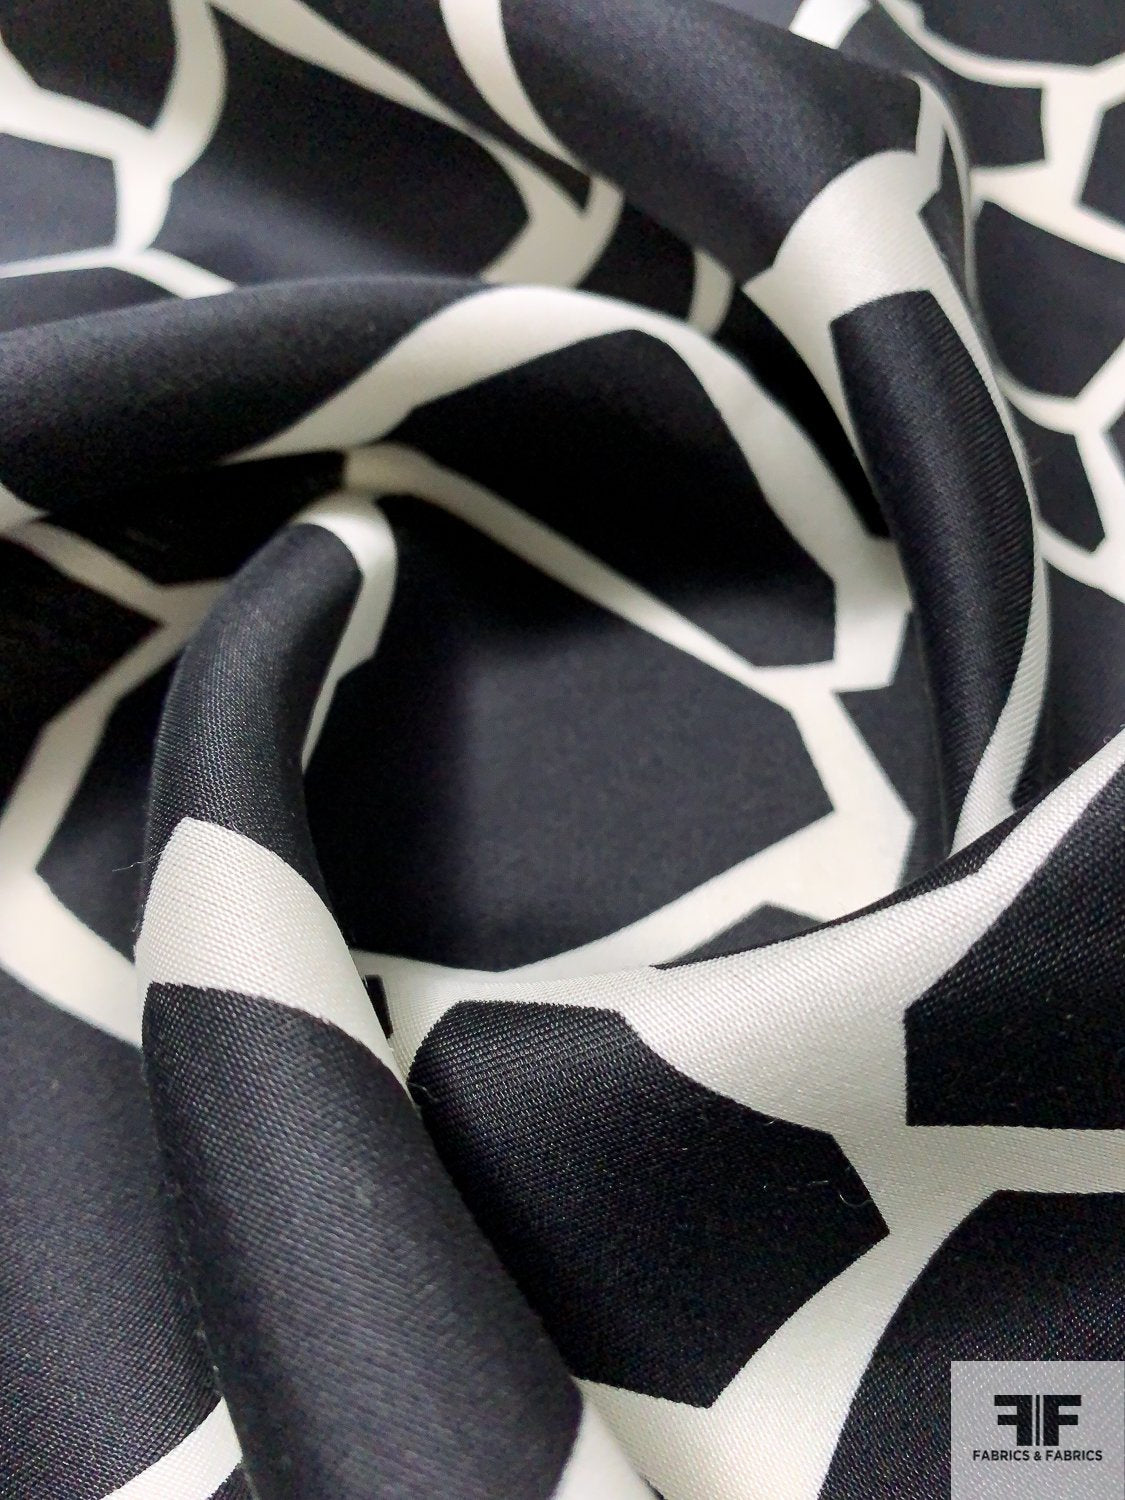 Geometric Graphic Printed Silk and Wool - Black / Off-White